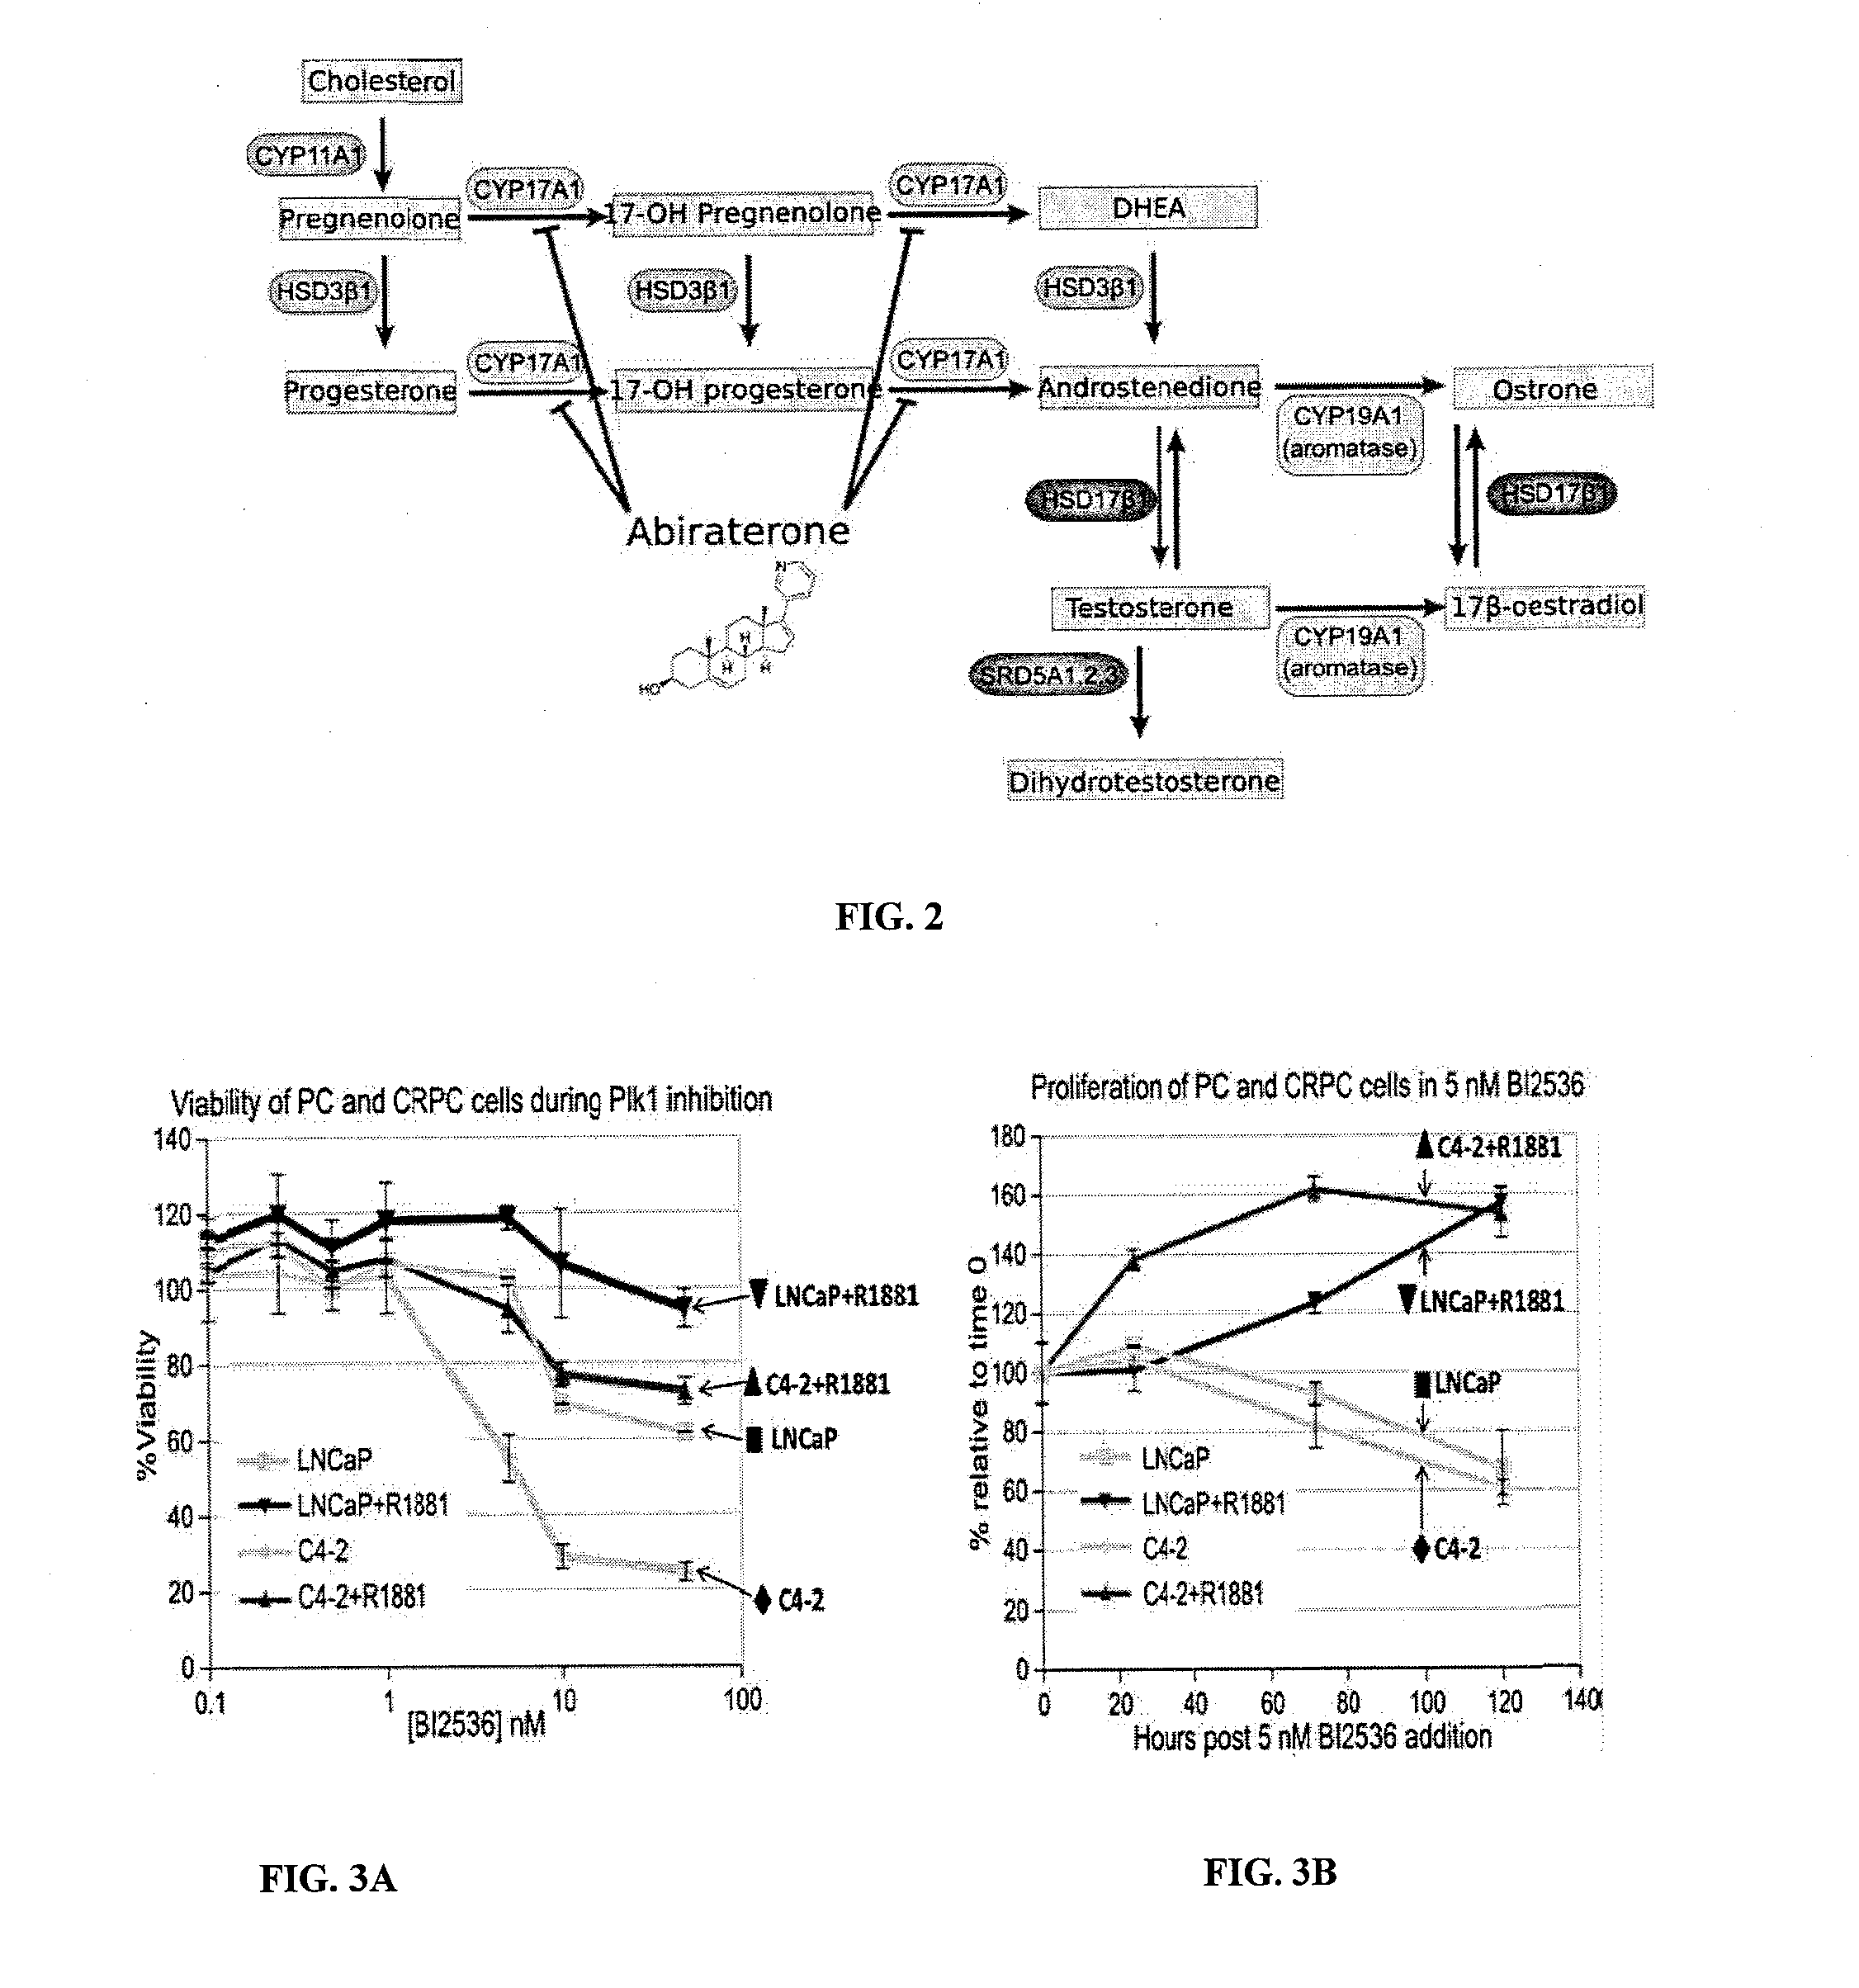 Combination Therapies and Methods of Use Thereof for Treating Cancer